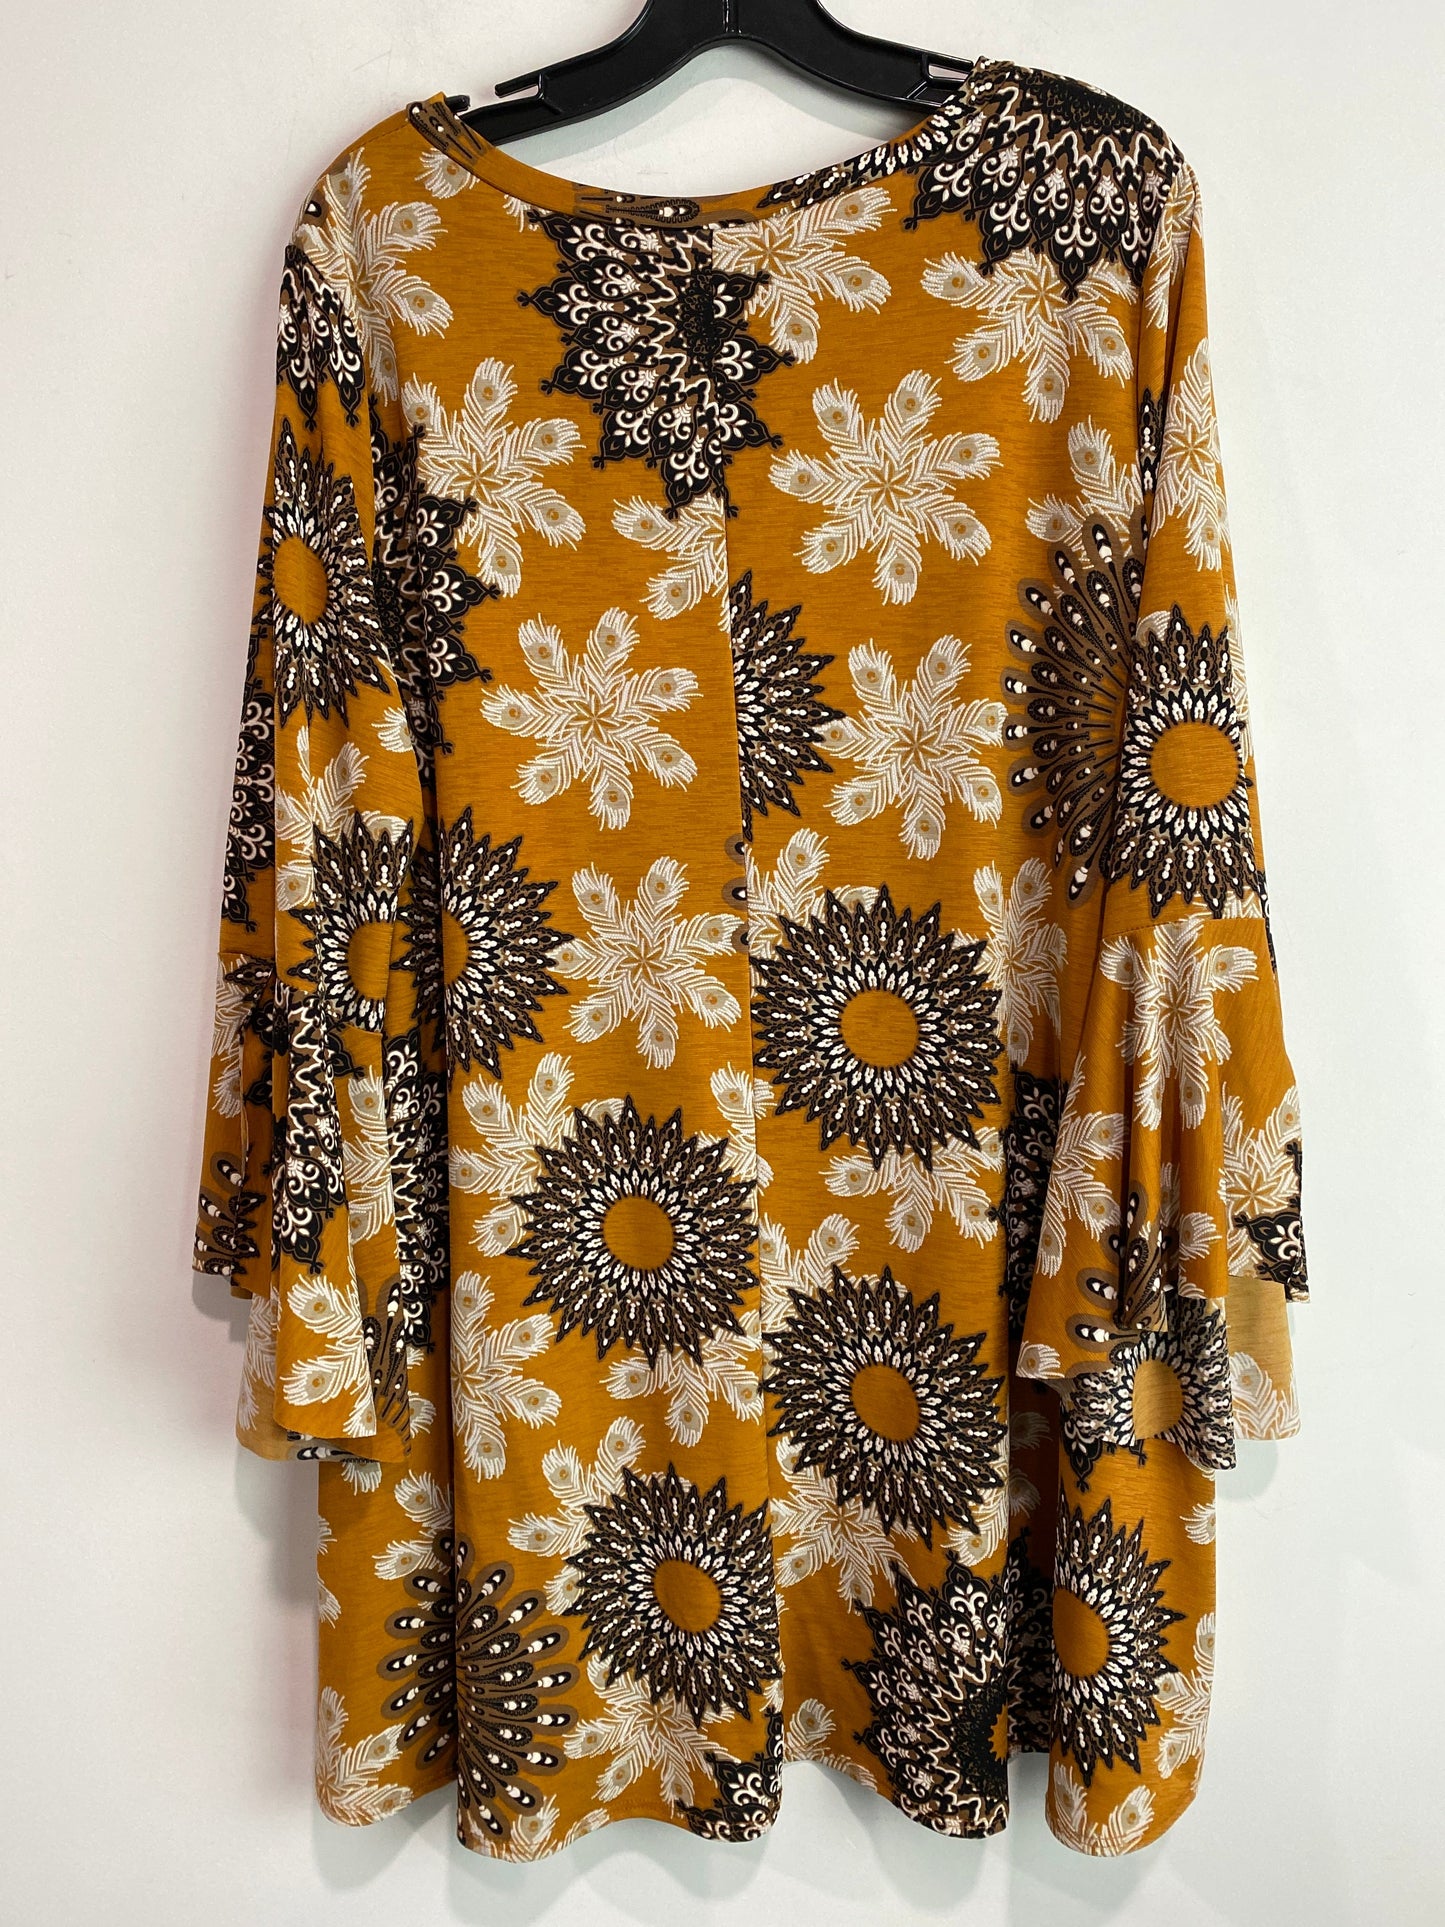 Yellow Top 3/4 Sleeve Clothes Mentor, Size 3x